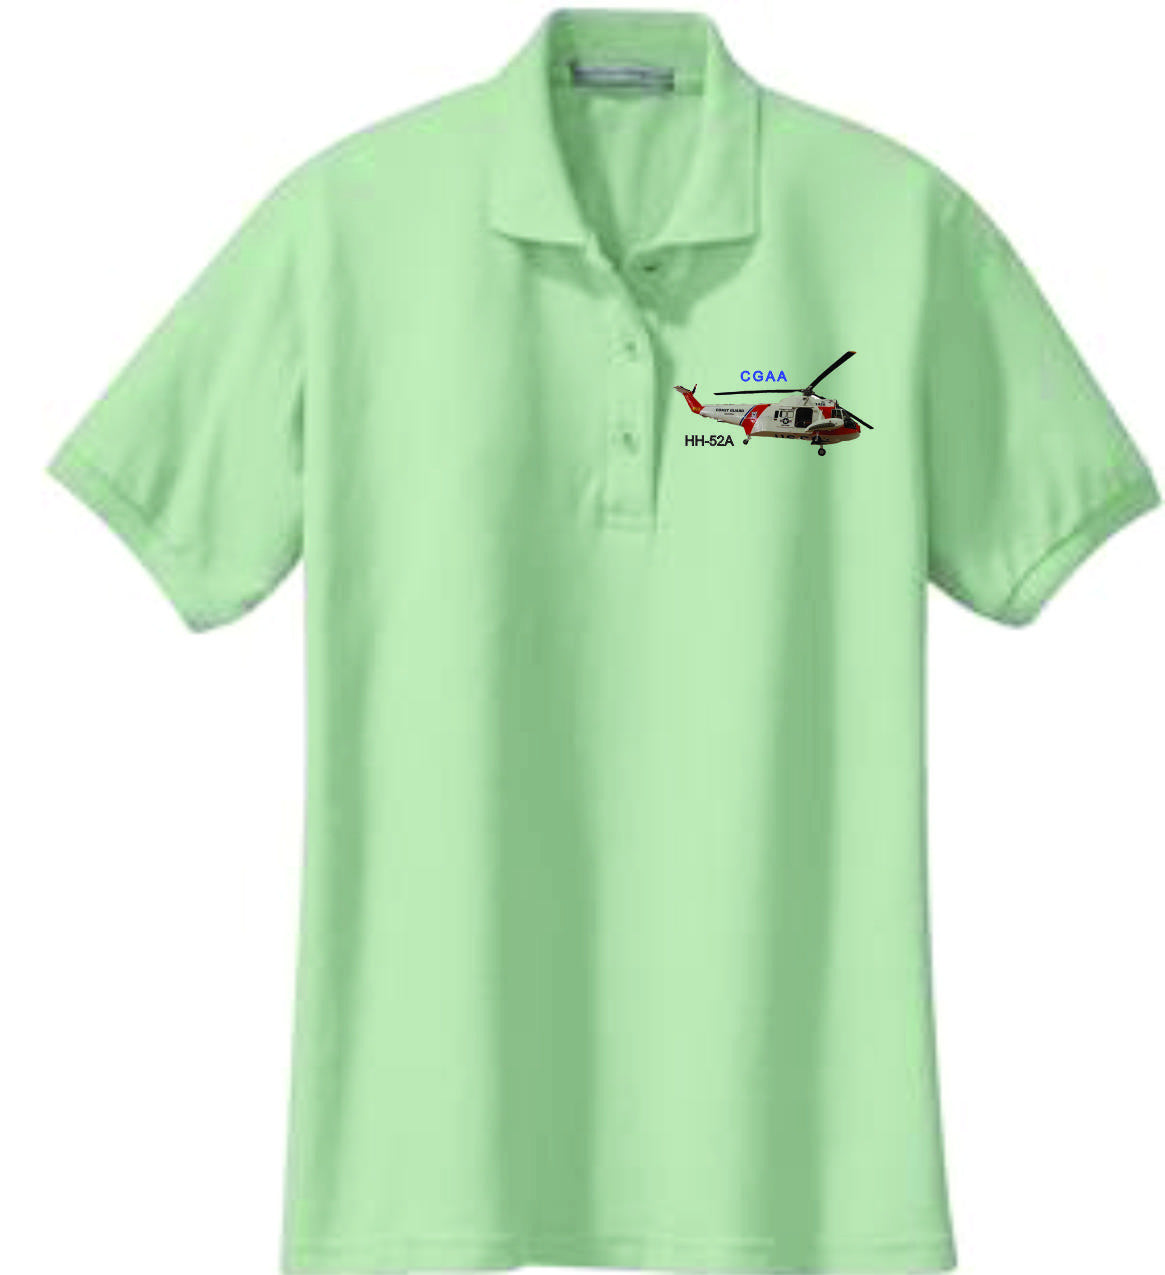 HH-52A Ladies Wicking Polo Shirt